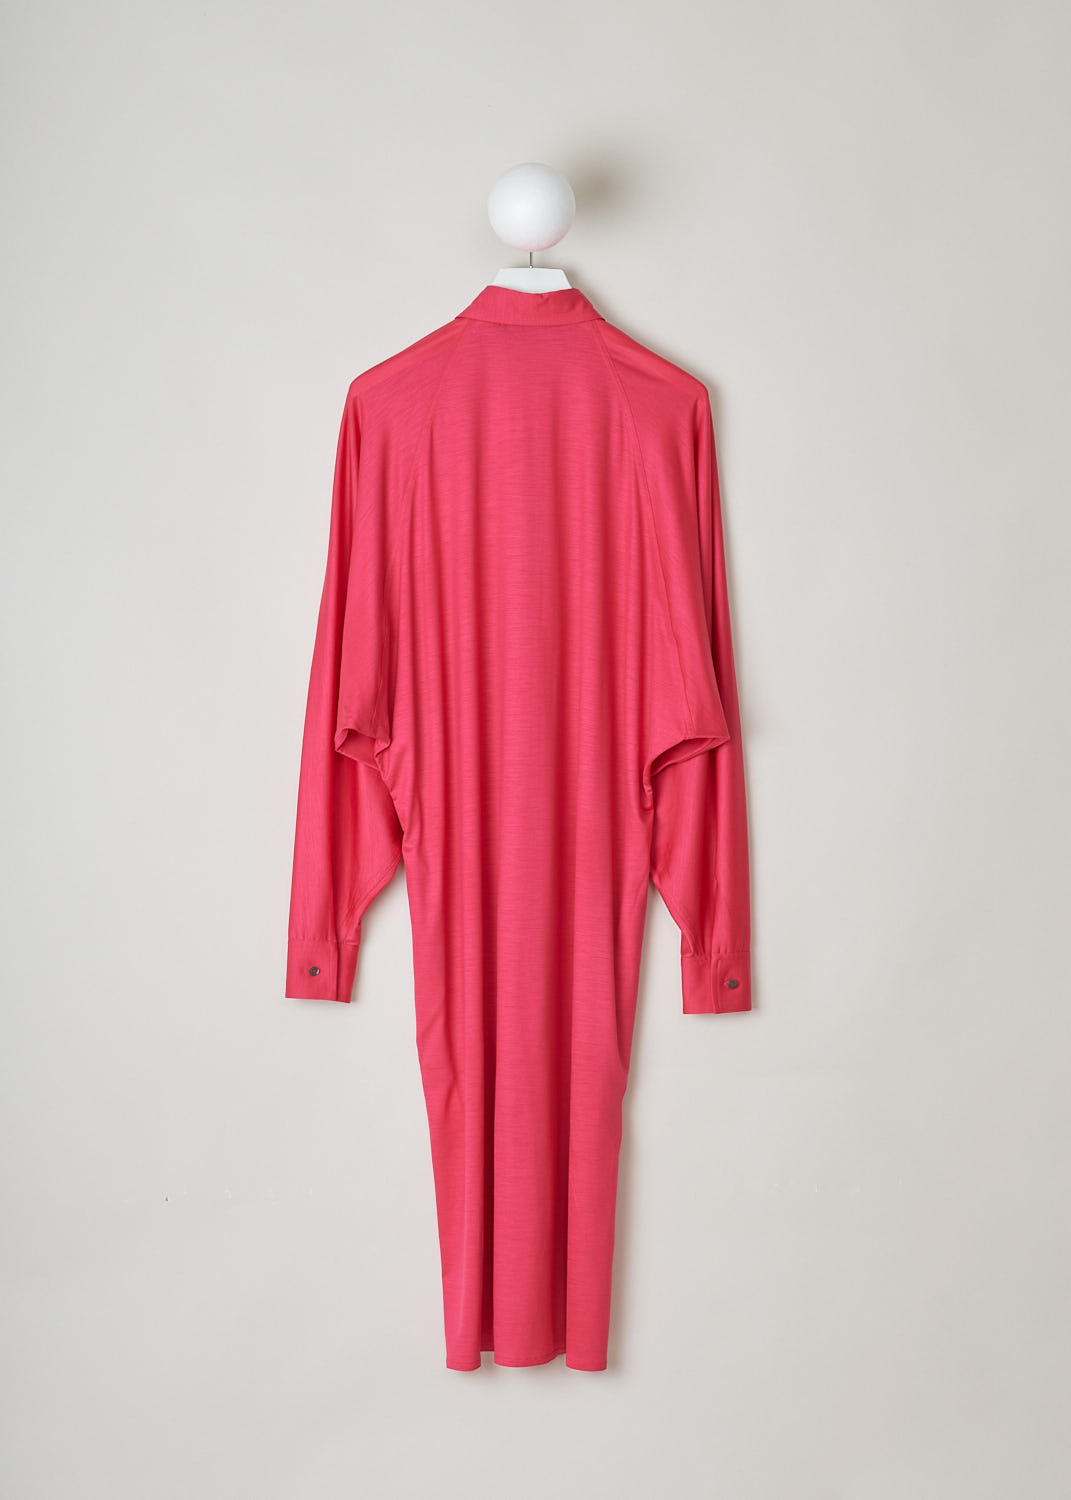 SOFIE Dâ€™HOORE, FUCHSIA COLORED SHIRT DRESS, DUMAS_WOJE_FUCHSIA, Pink, Back, This mid-length fuchsia shirt dress features a classic collar, front button closure and dolman sleeves with buttoned cuffs. Side pockets can be found concealed in the seam.
